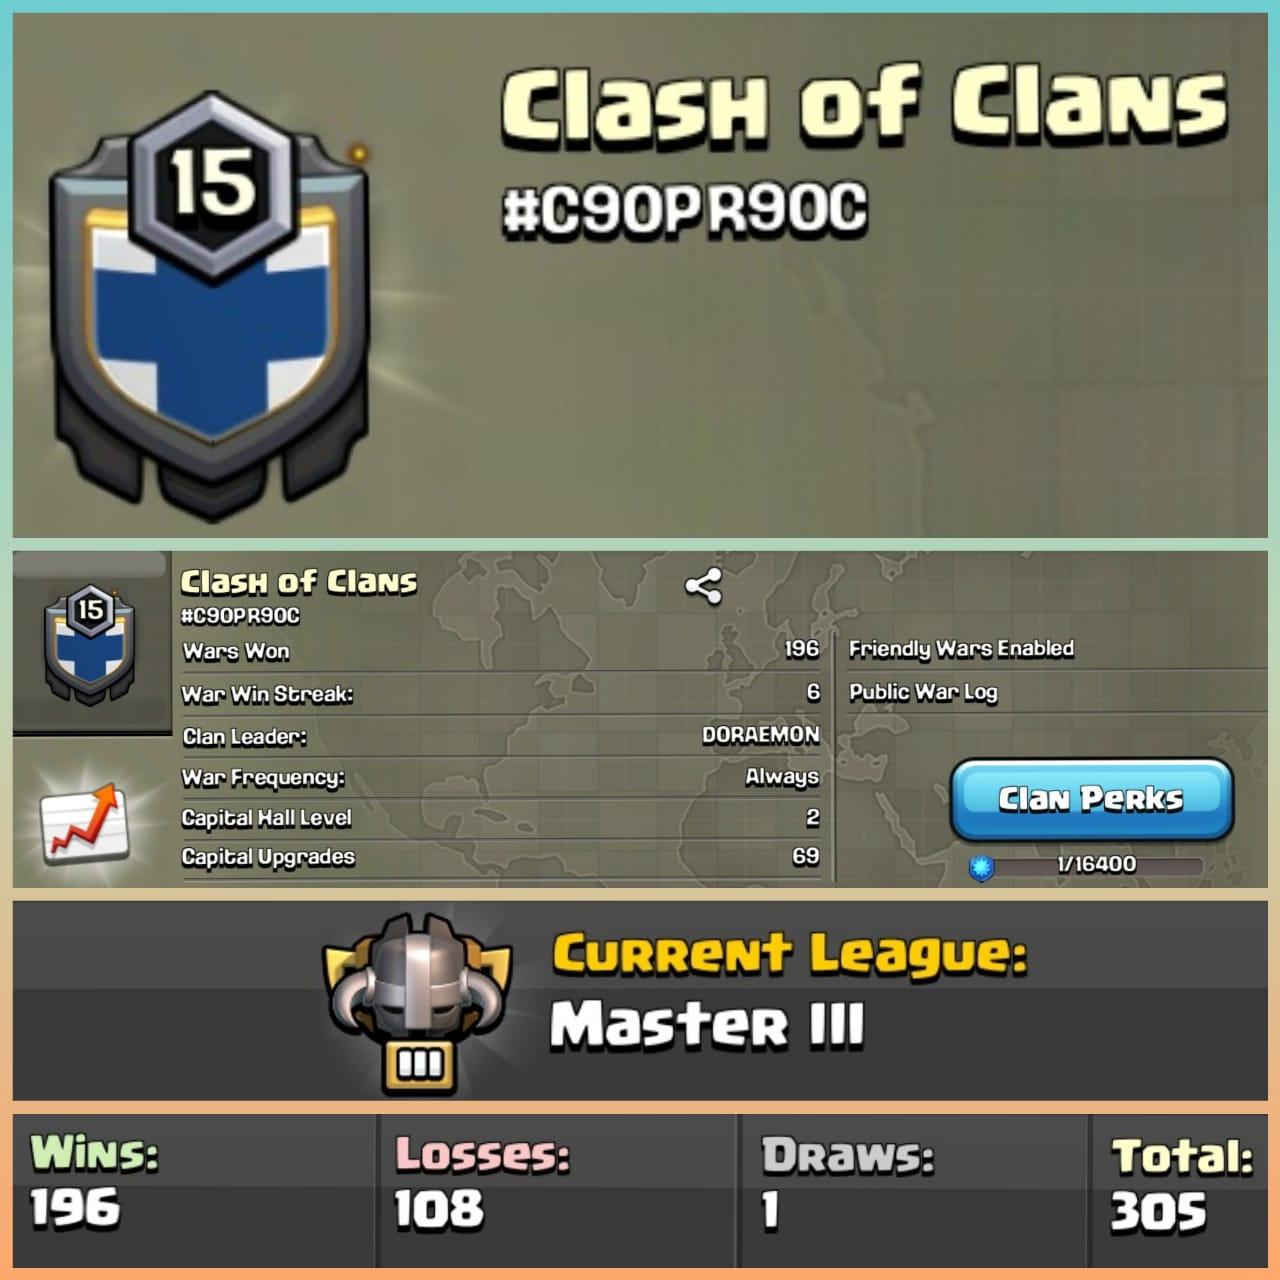 NAME- Clash of Clans - LEVEL-15 - MASTER-3 - W- 196 - L- 108 - IOS/ANDROID